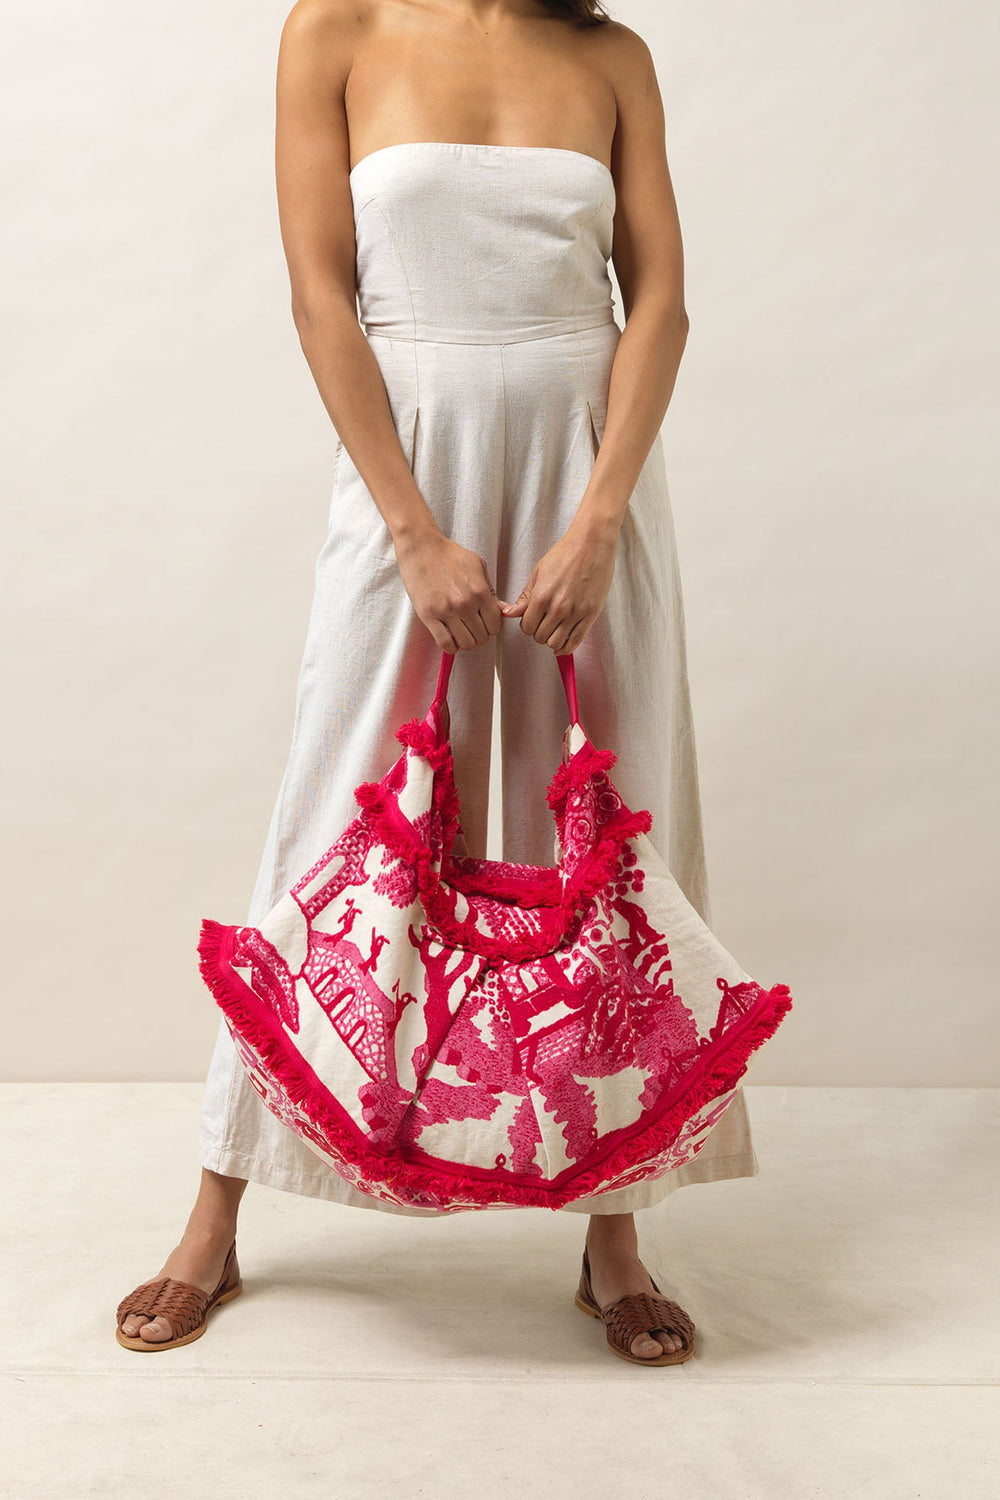 Women's accessories, gifts for her. sustainable Day to day bag in pink and white giant willow print by One Hundred Stars